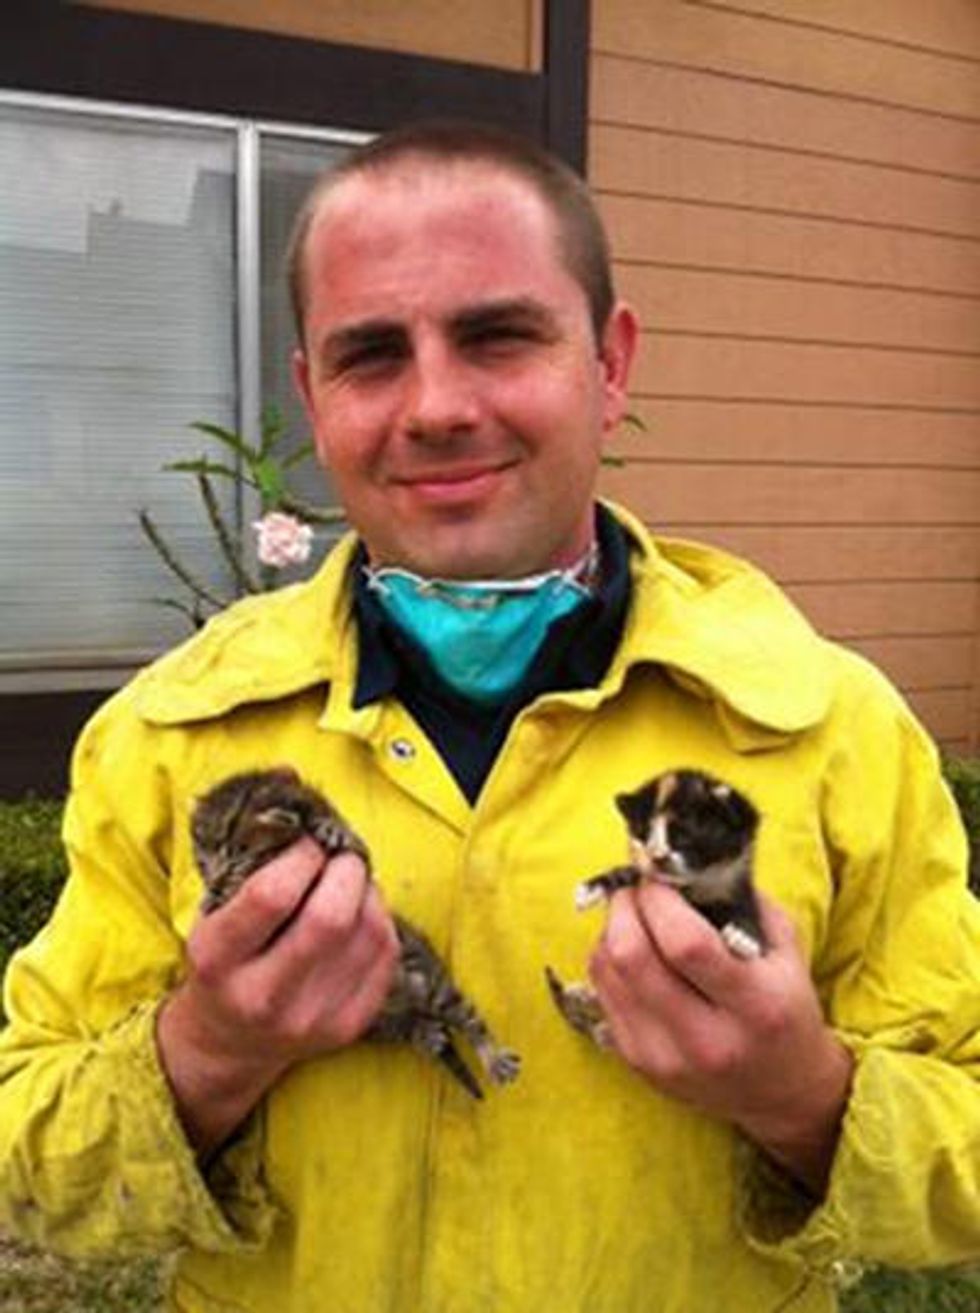 Firefighters Rescue Trapped Kittens From Wall & Find Them Temporary Homes